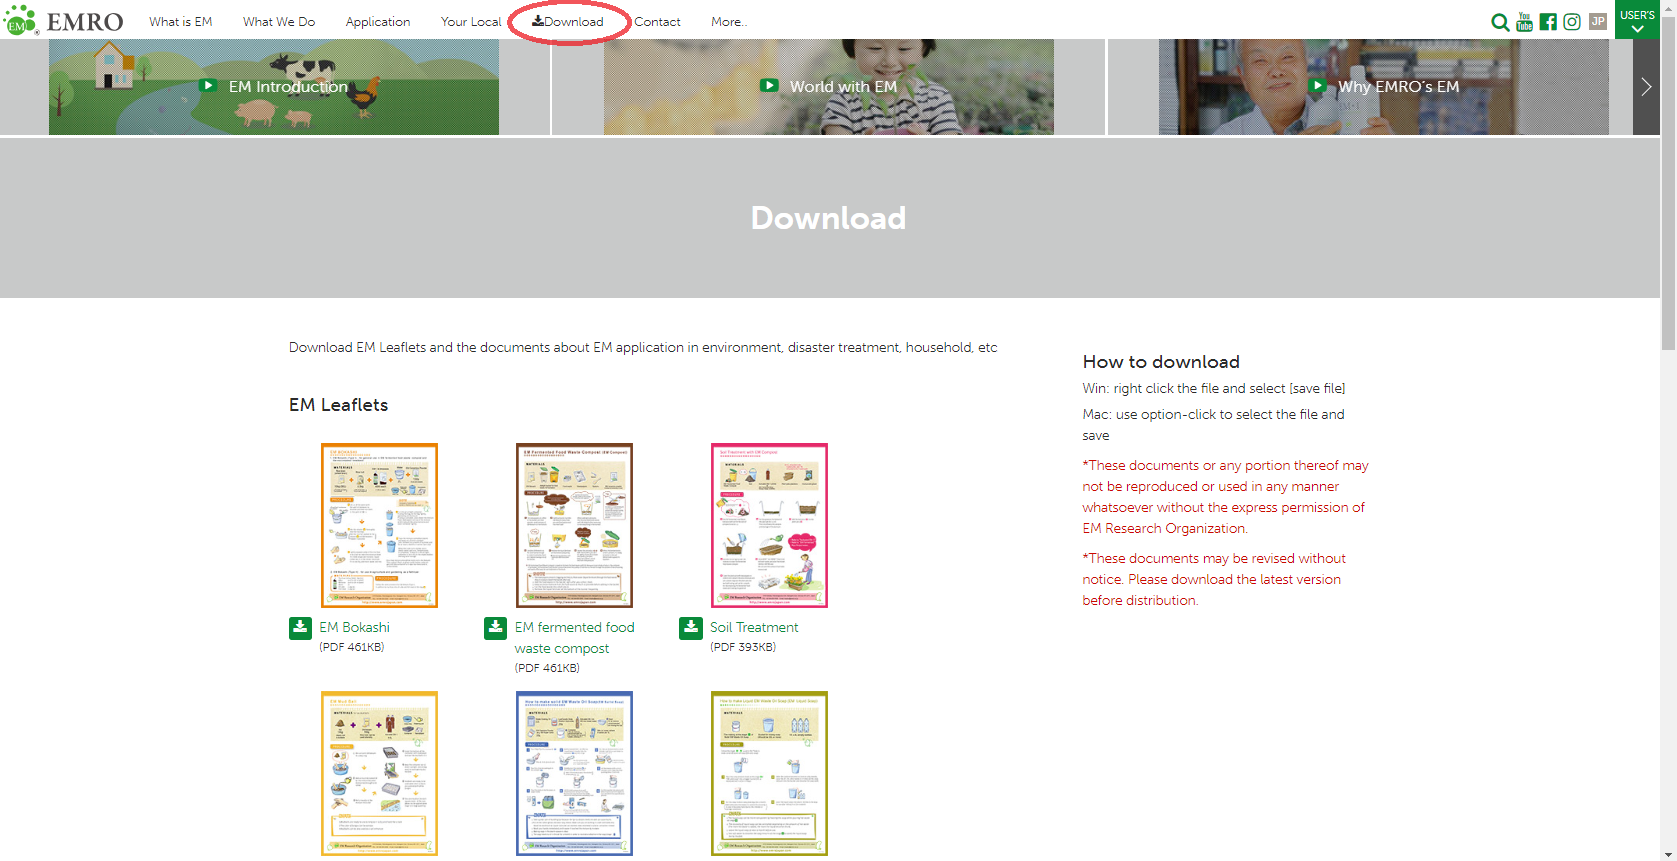 A NEW download page on EMRO's website!